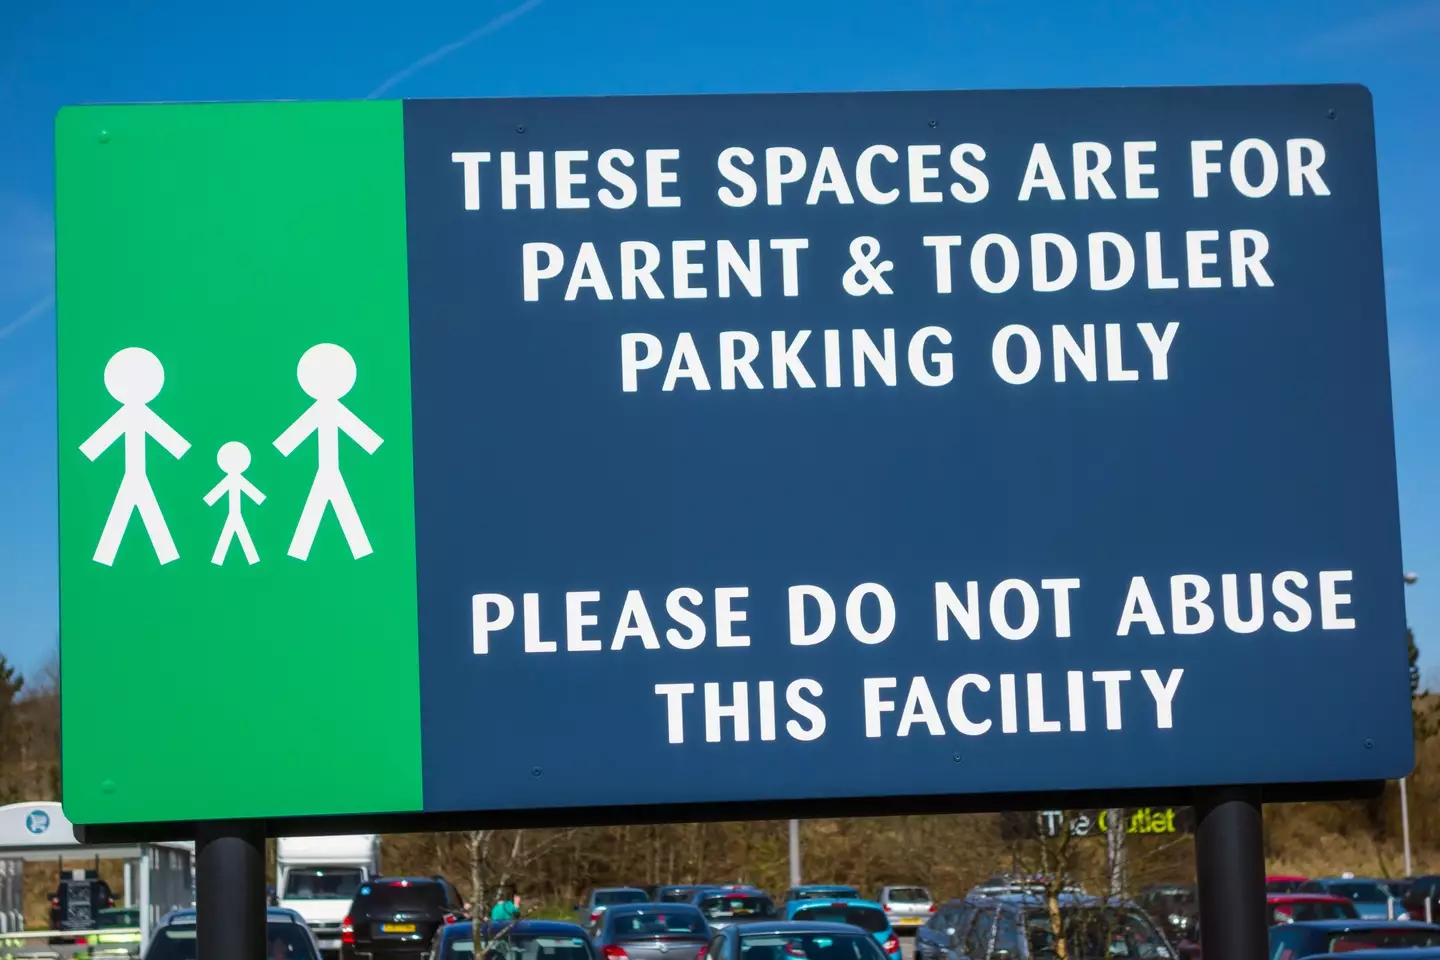 Parents can be landed with a hefty fine if caught misusing the parking space.